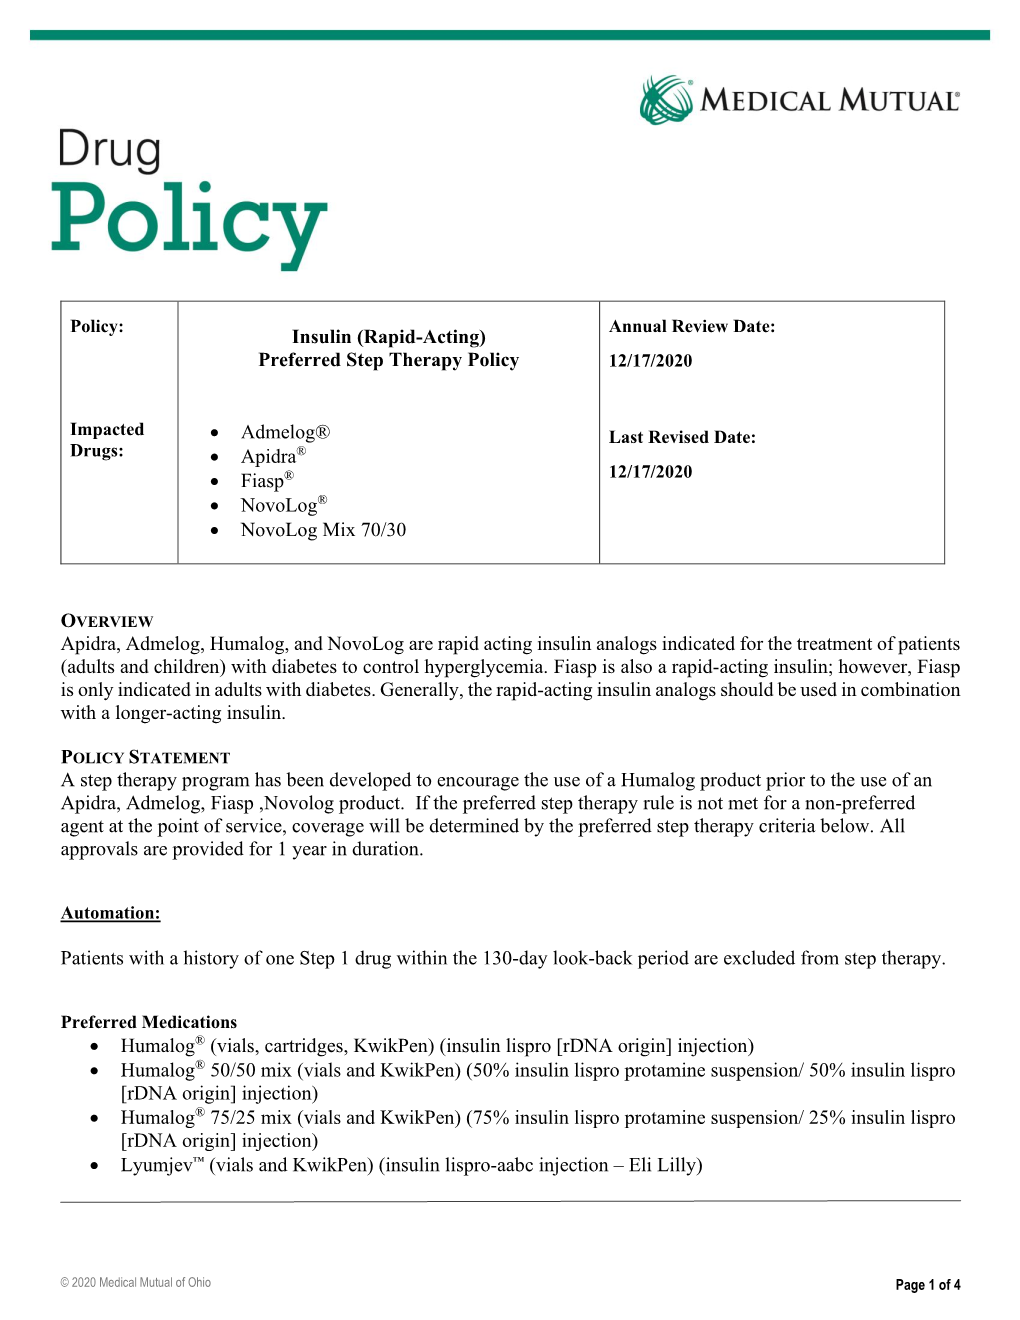 Insulin (Rapid-Acting) Preferred Step Therapy Policy 12/17/2020